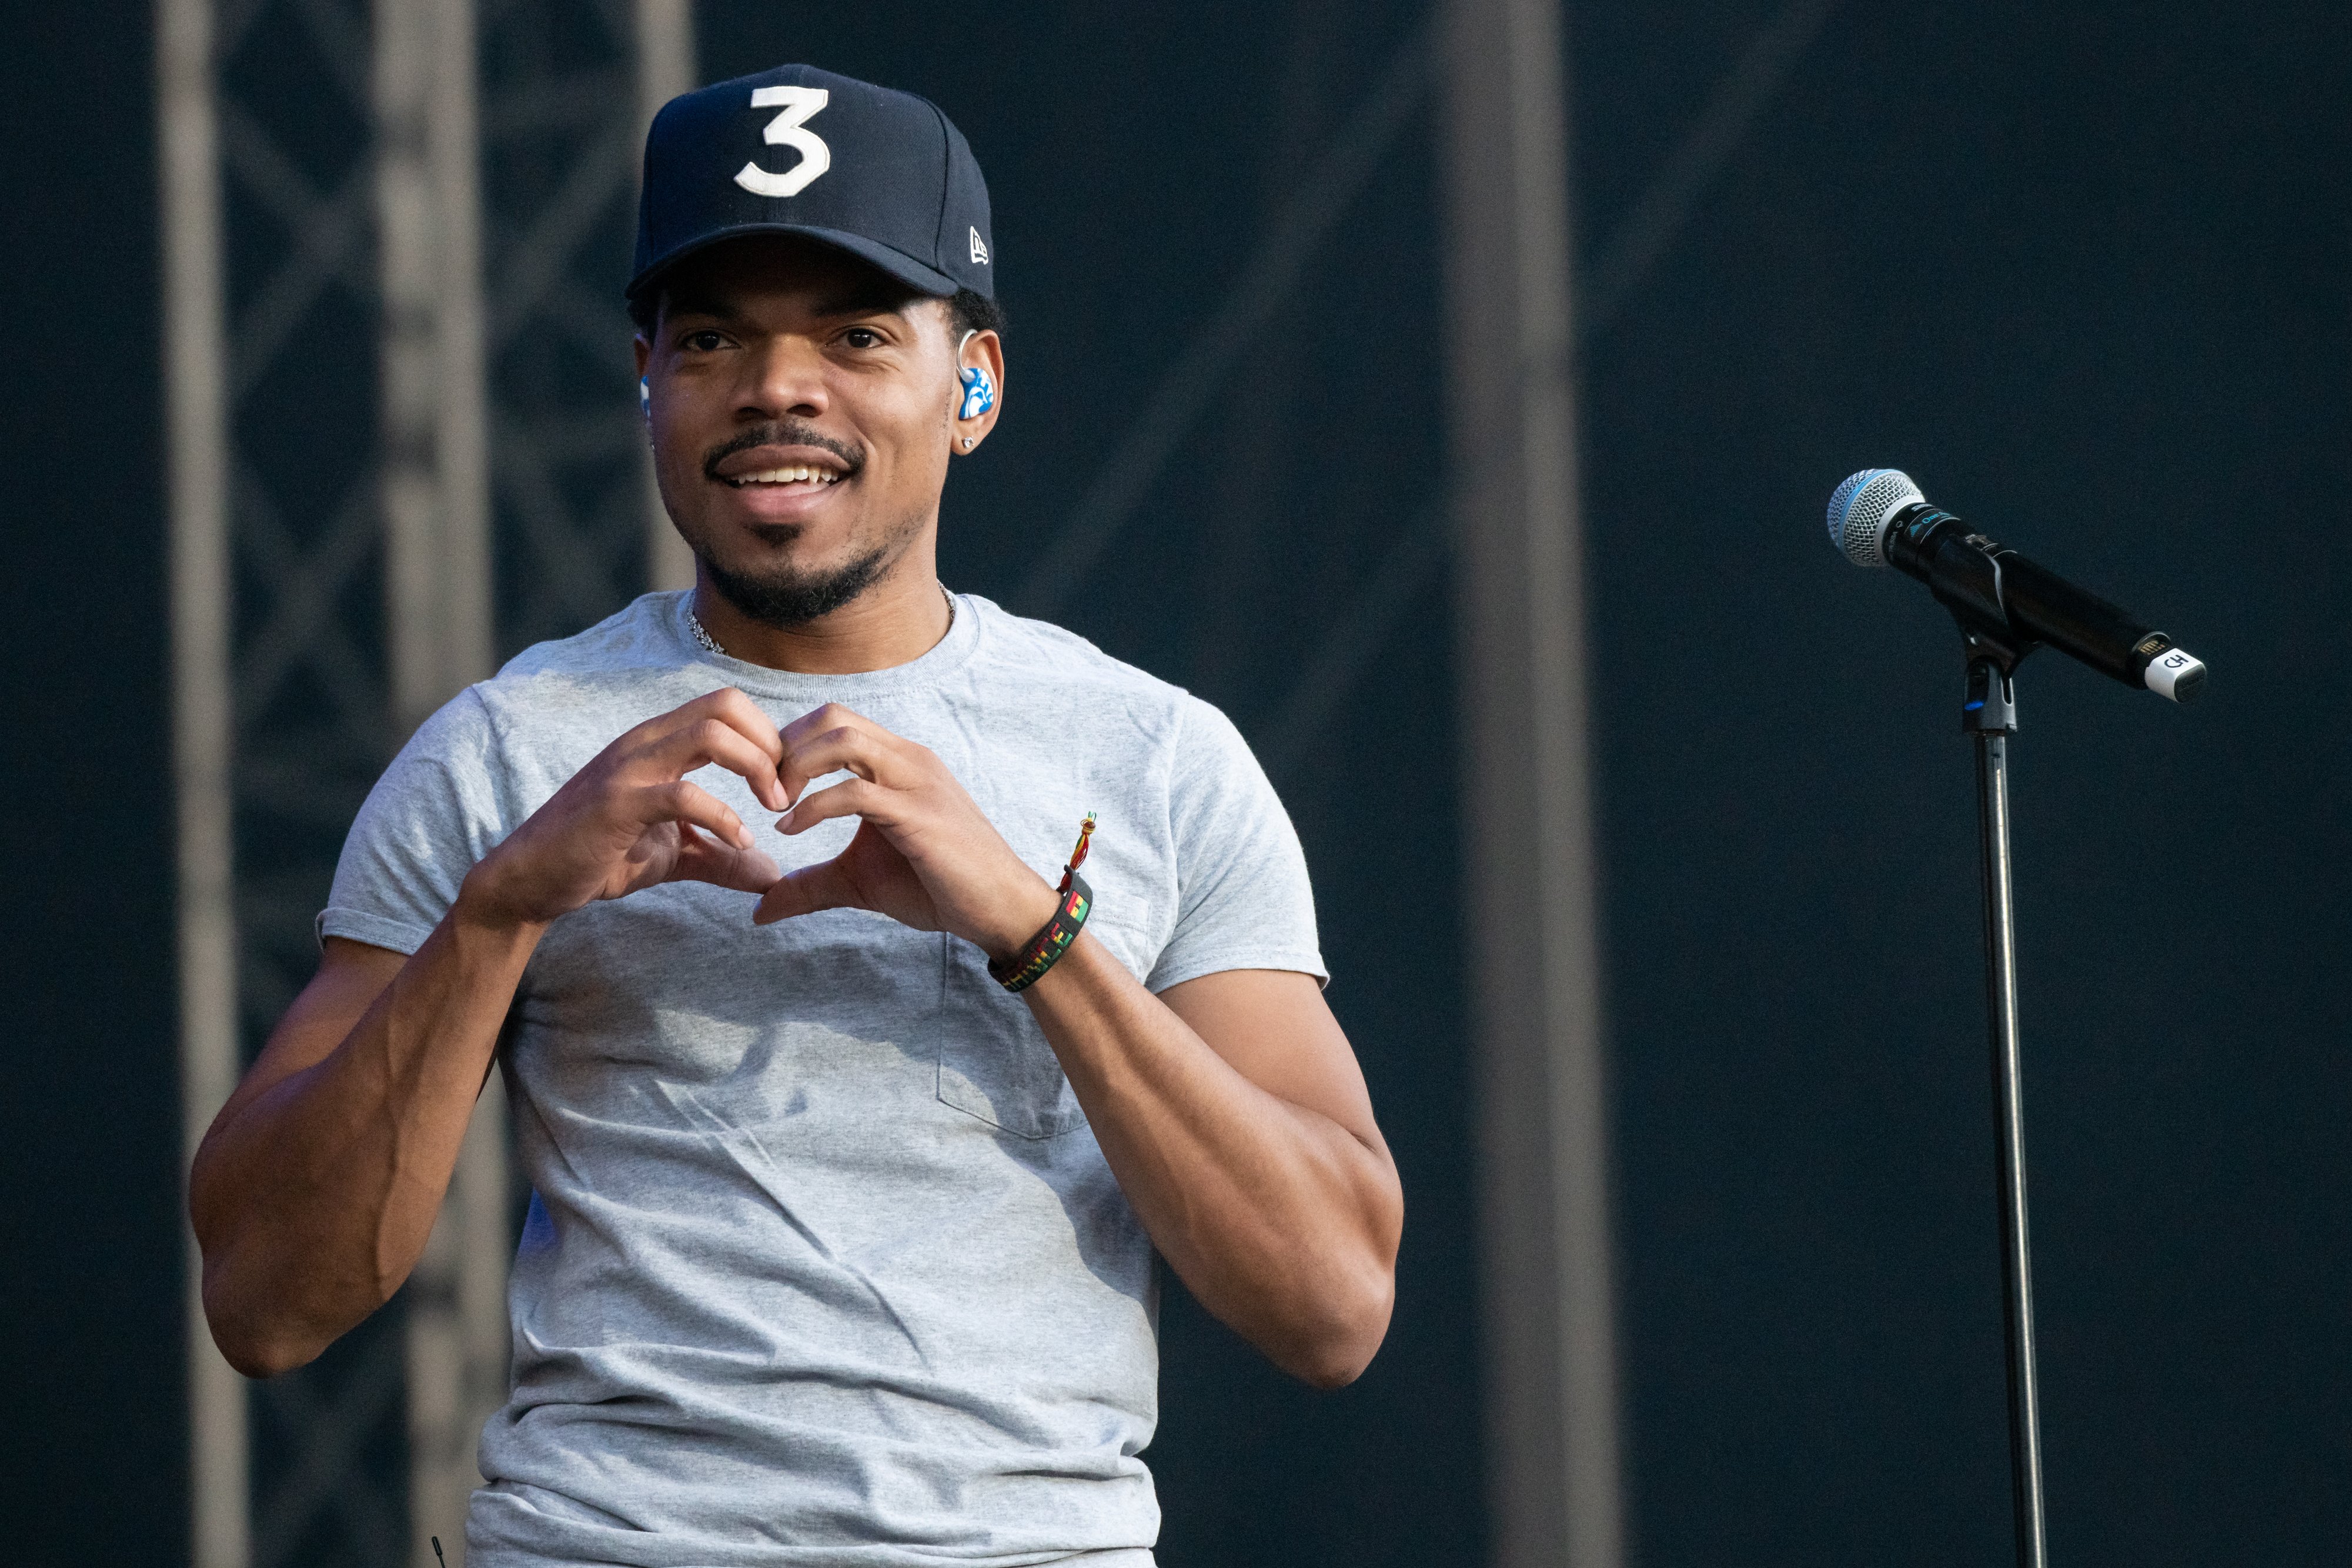 Chance the Rapper on stage at the Way out West Festival on August 12, 2022 | Source: Getty Images